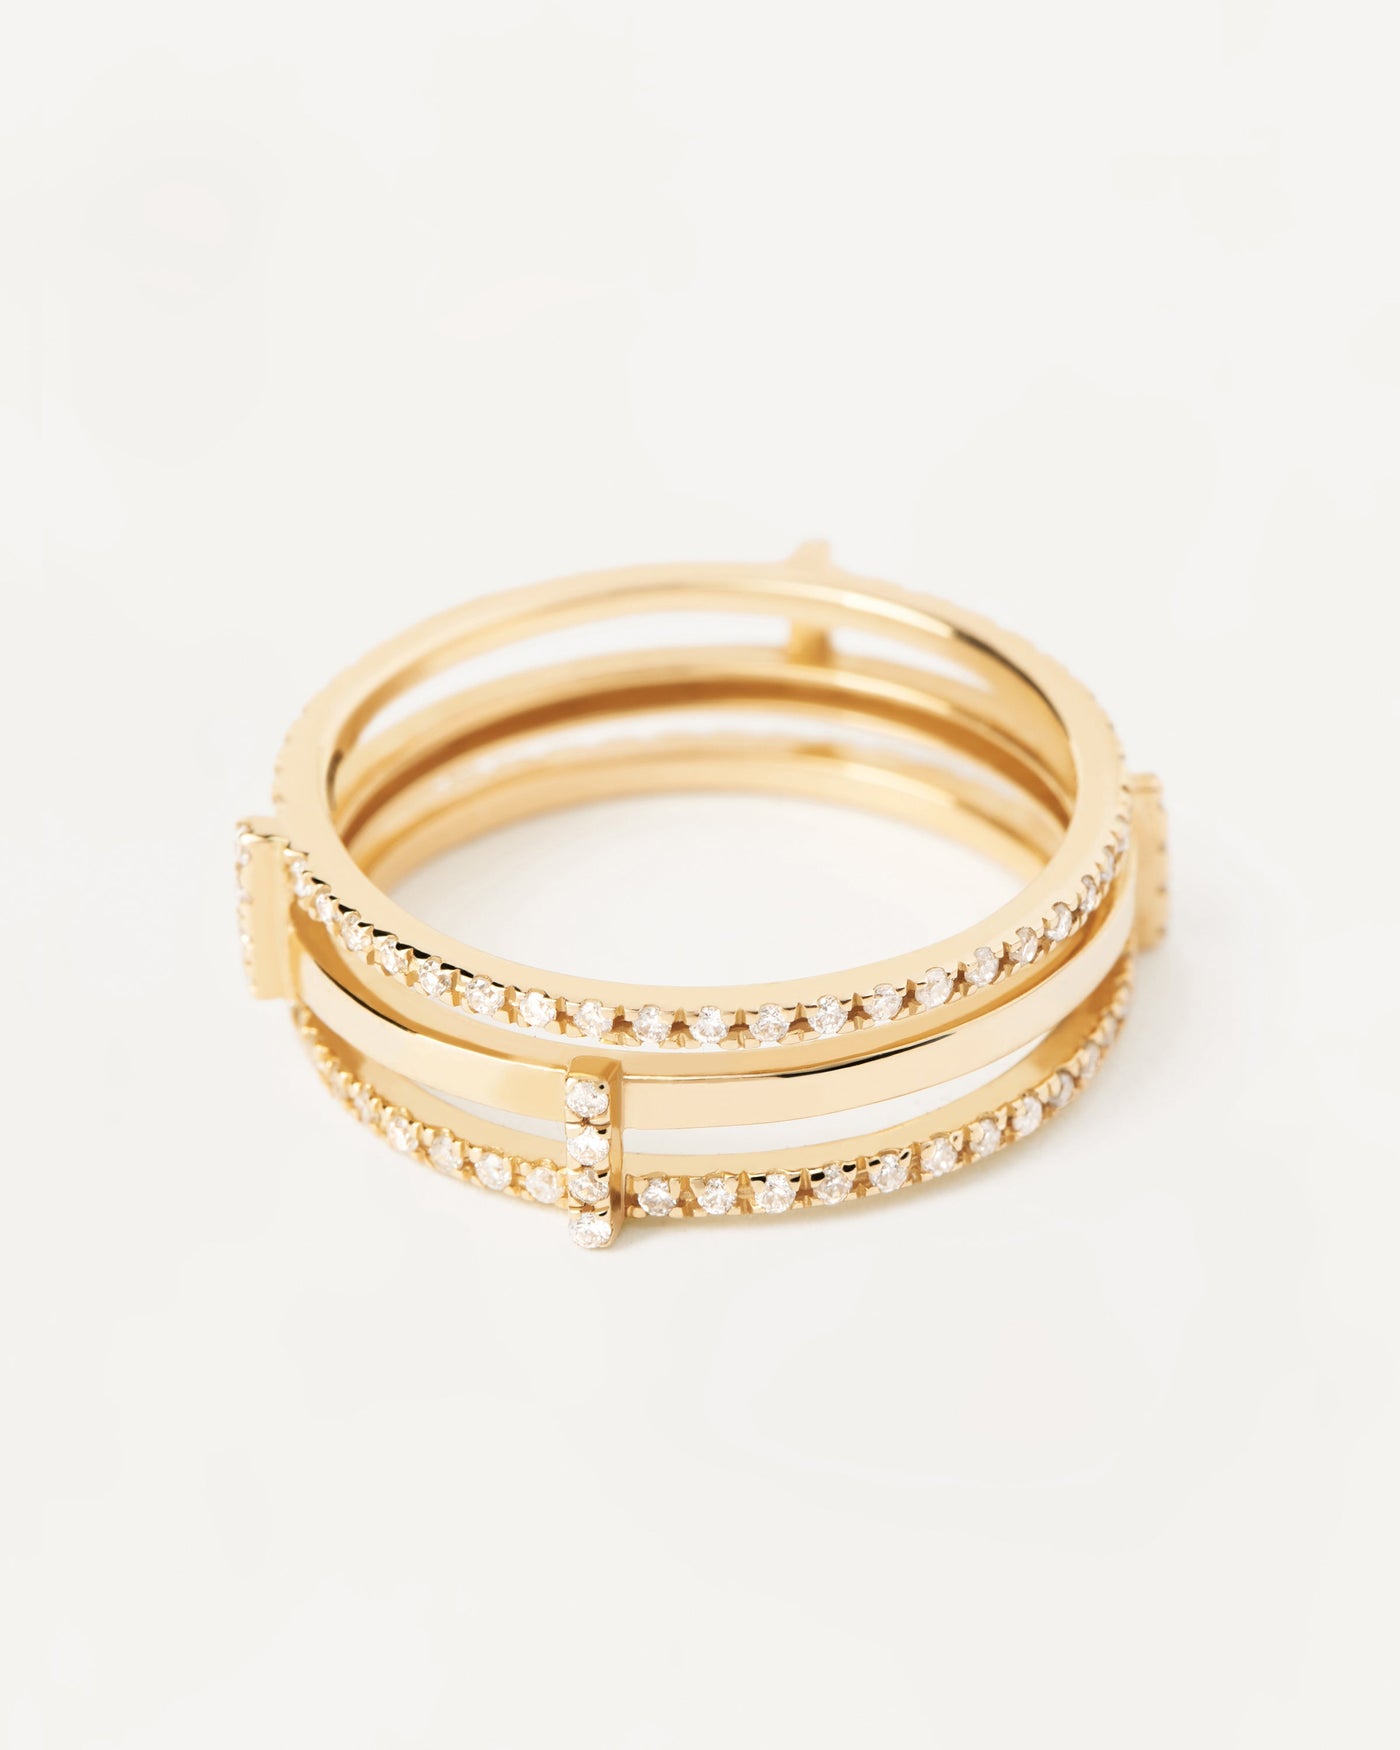 2023 Selection | Diamonds and gold Track Ring. 18K yellow gold eternity ring with three bands of lab-grown diamonds, making 0.52 carat. Get the latest arrival from PDPAOLA. Place your order safely and get this Best Seller. Free Shipping.